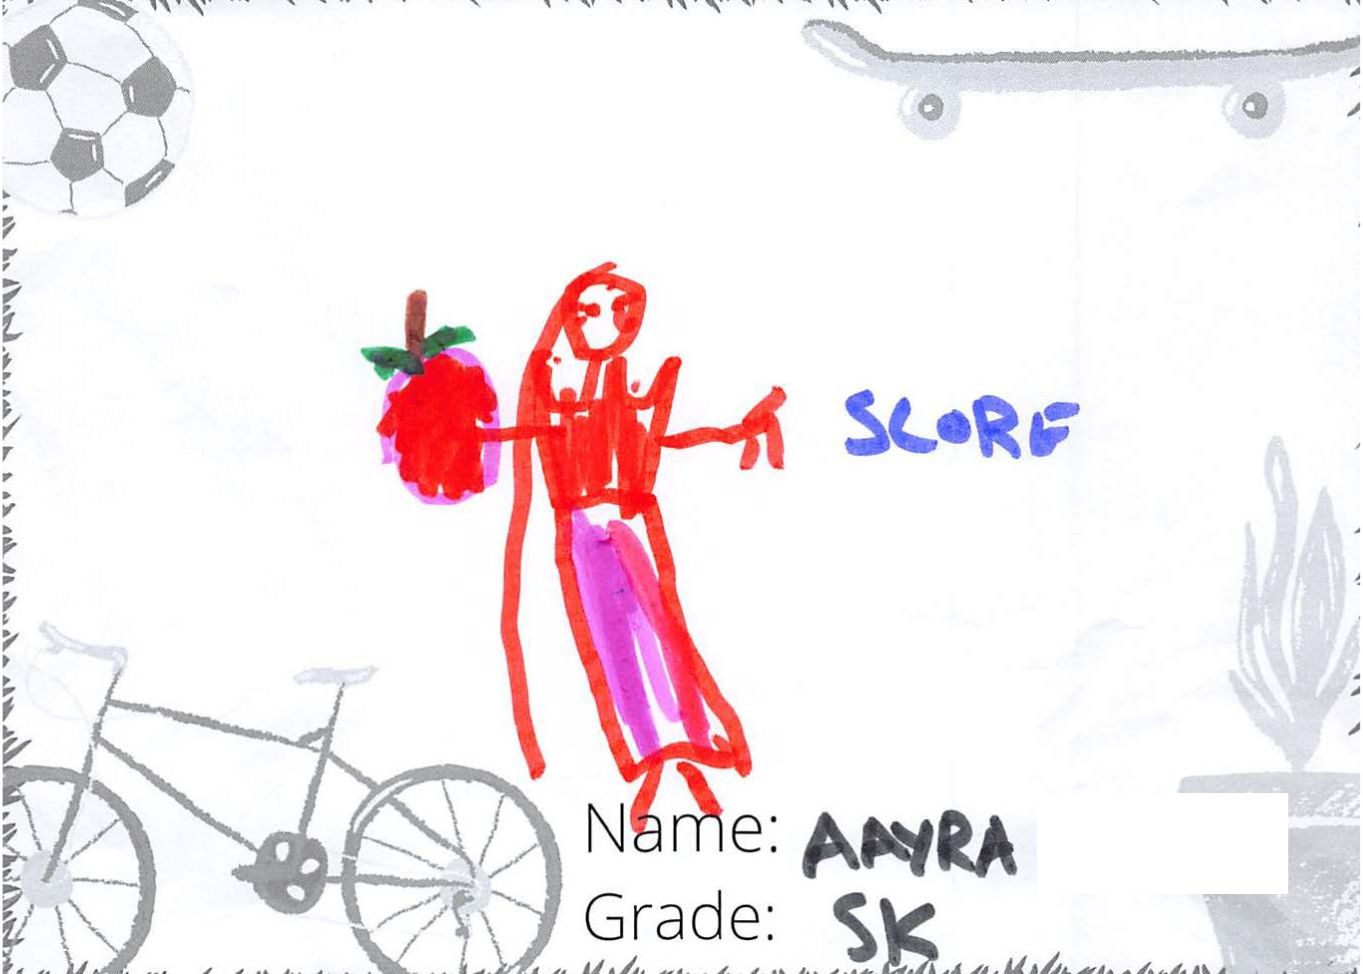 Marker drawing for the SCORE! logo contest. The drawing shows a person holding an apple.